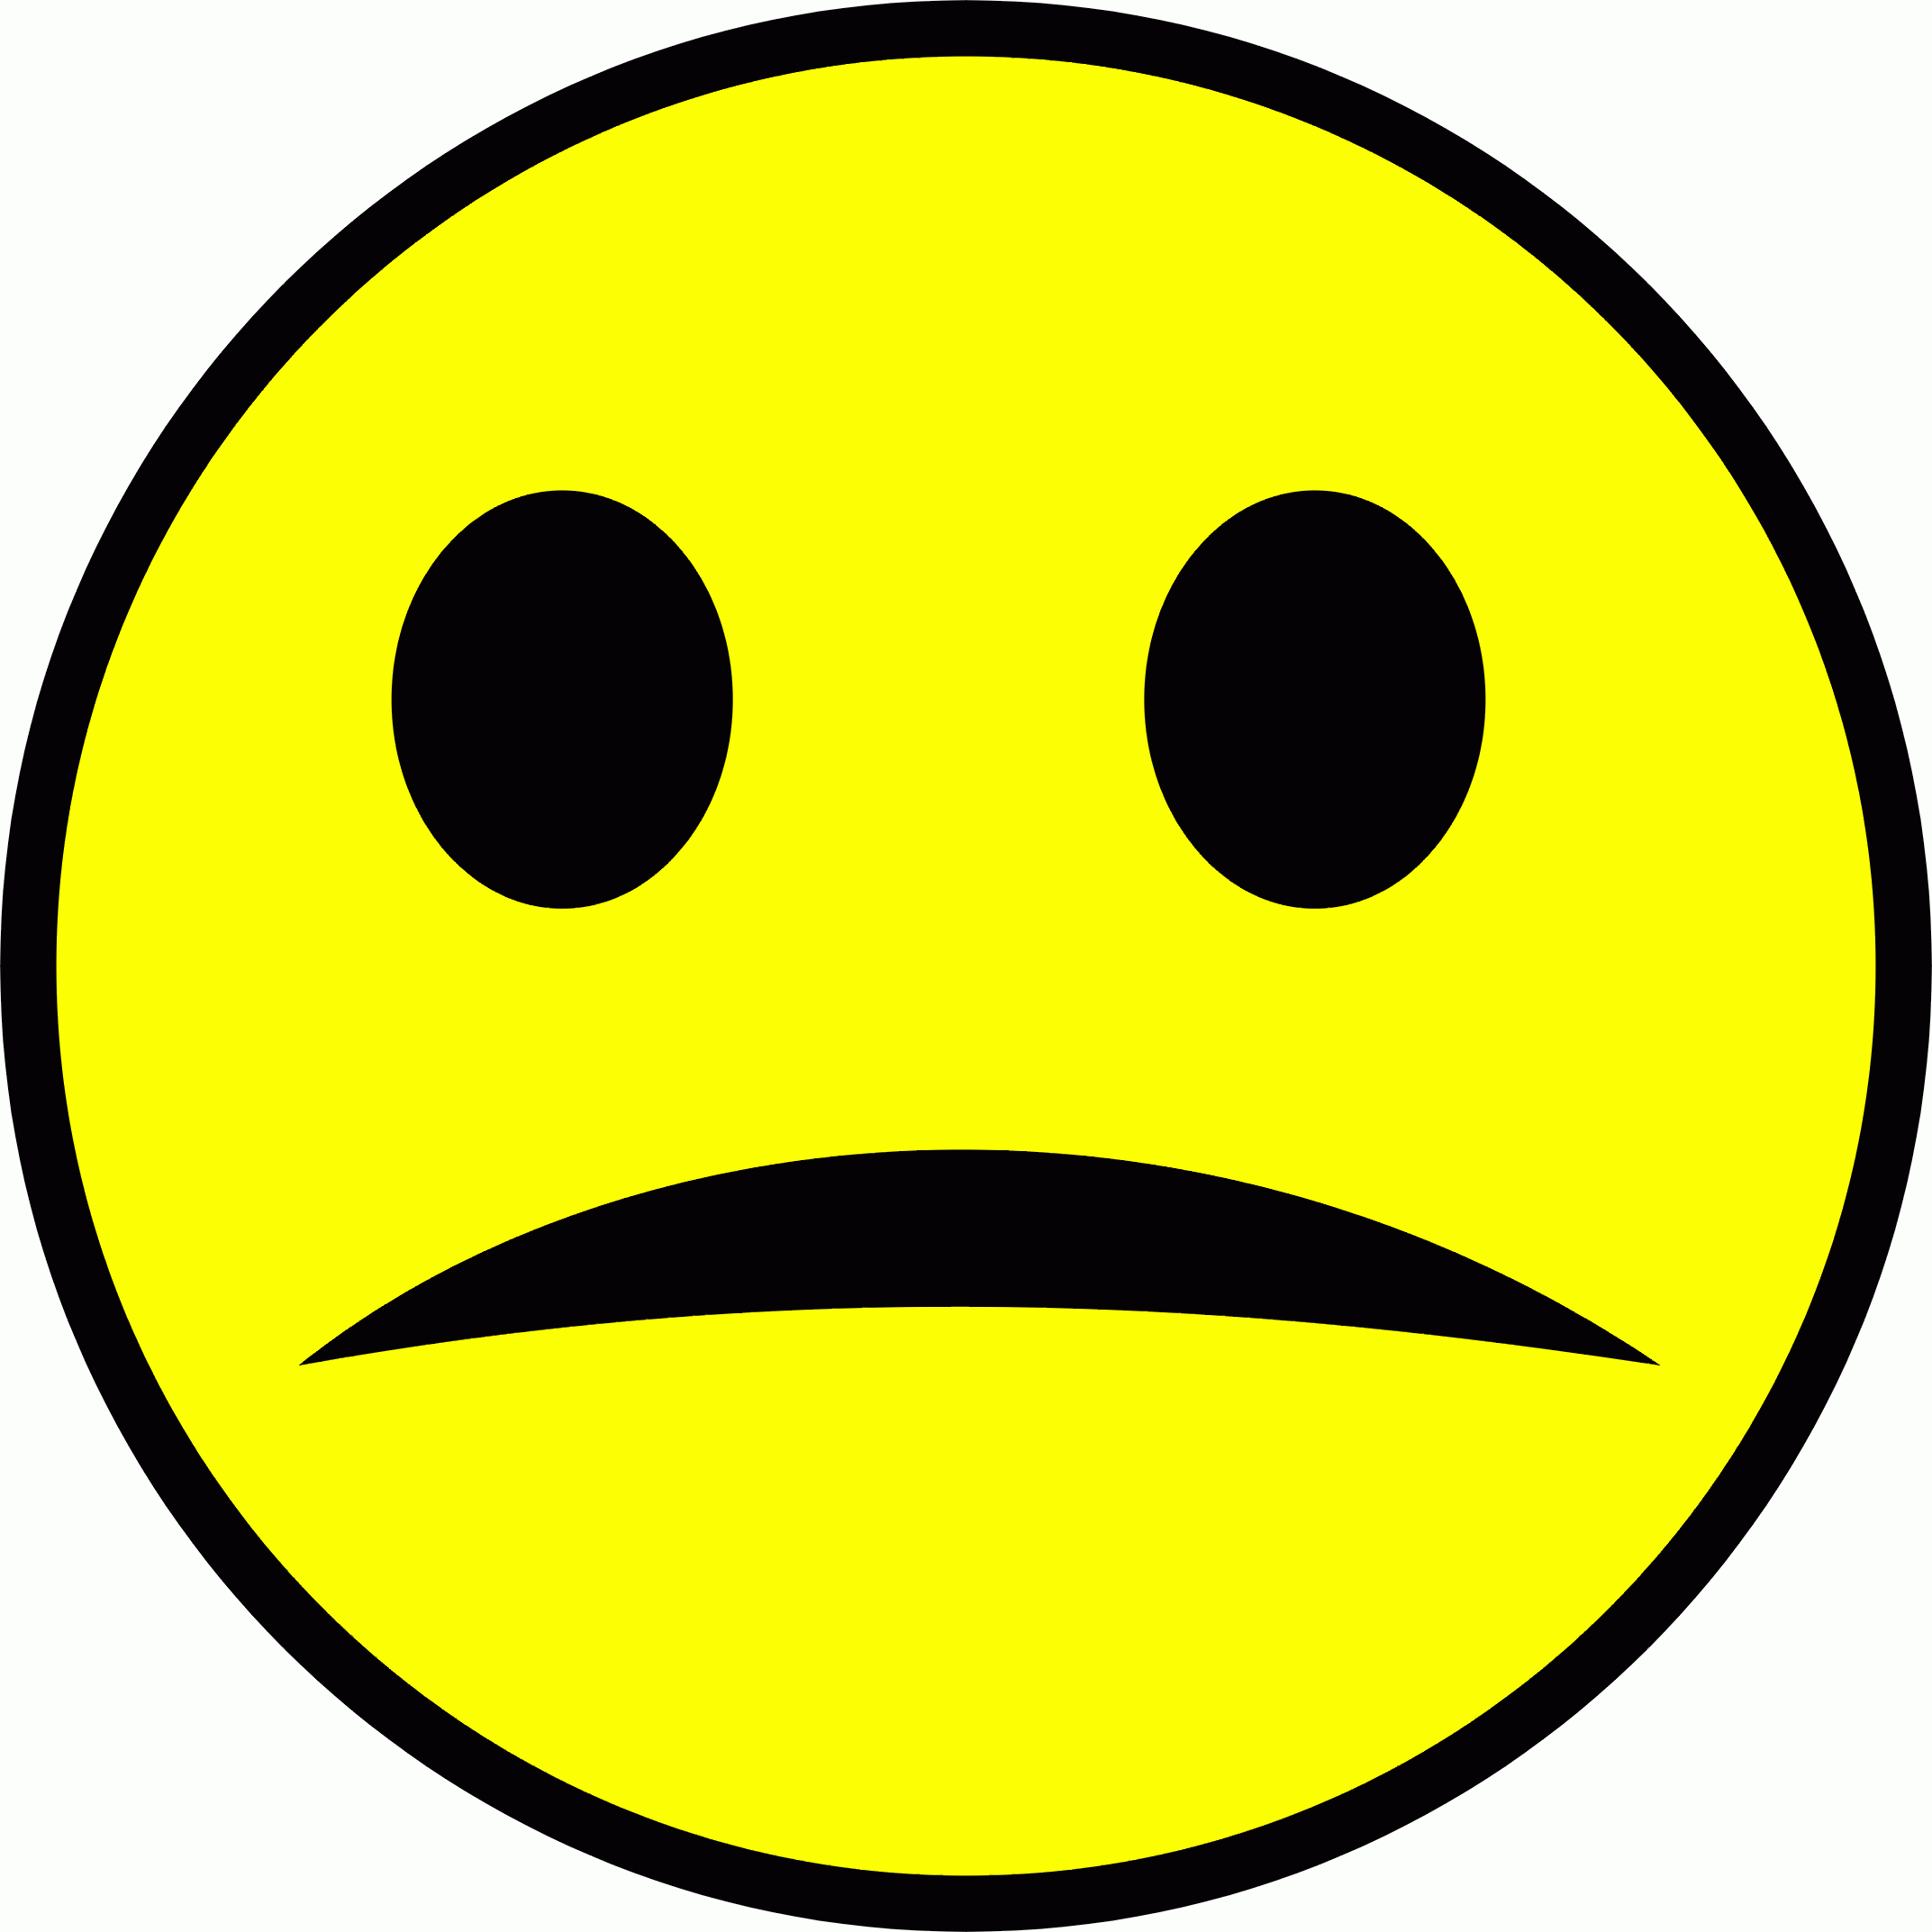 Free Pictures Of A Sad Face, Download Free Clip Art, Free Clip Art - Free Printable Sad Faces